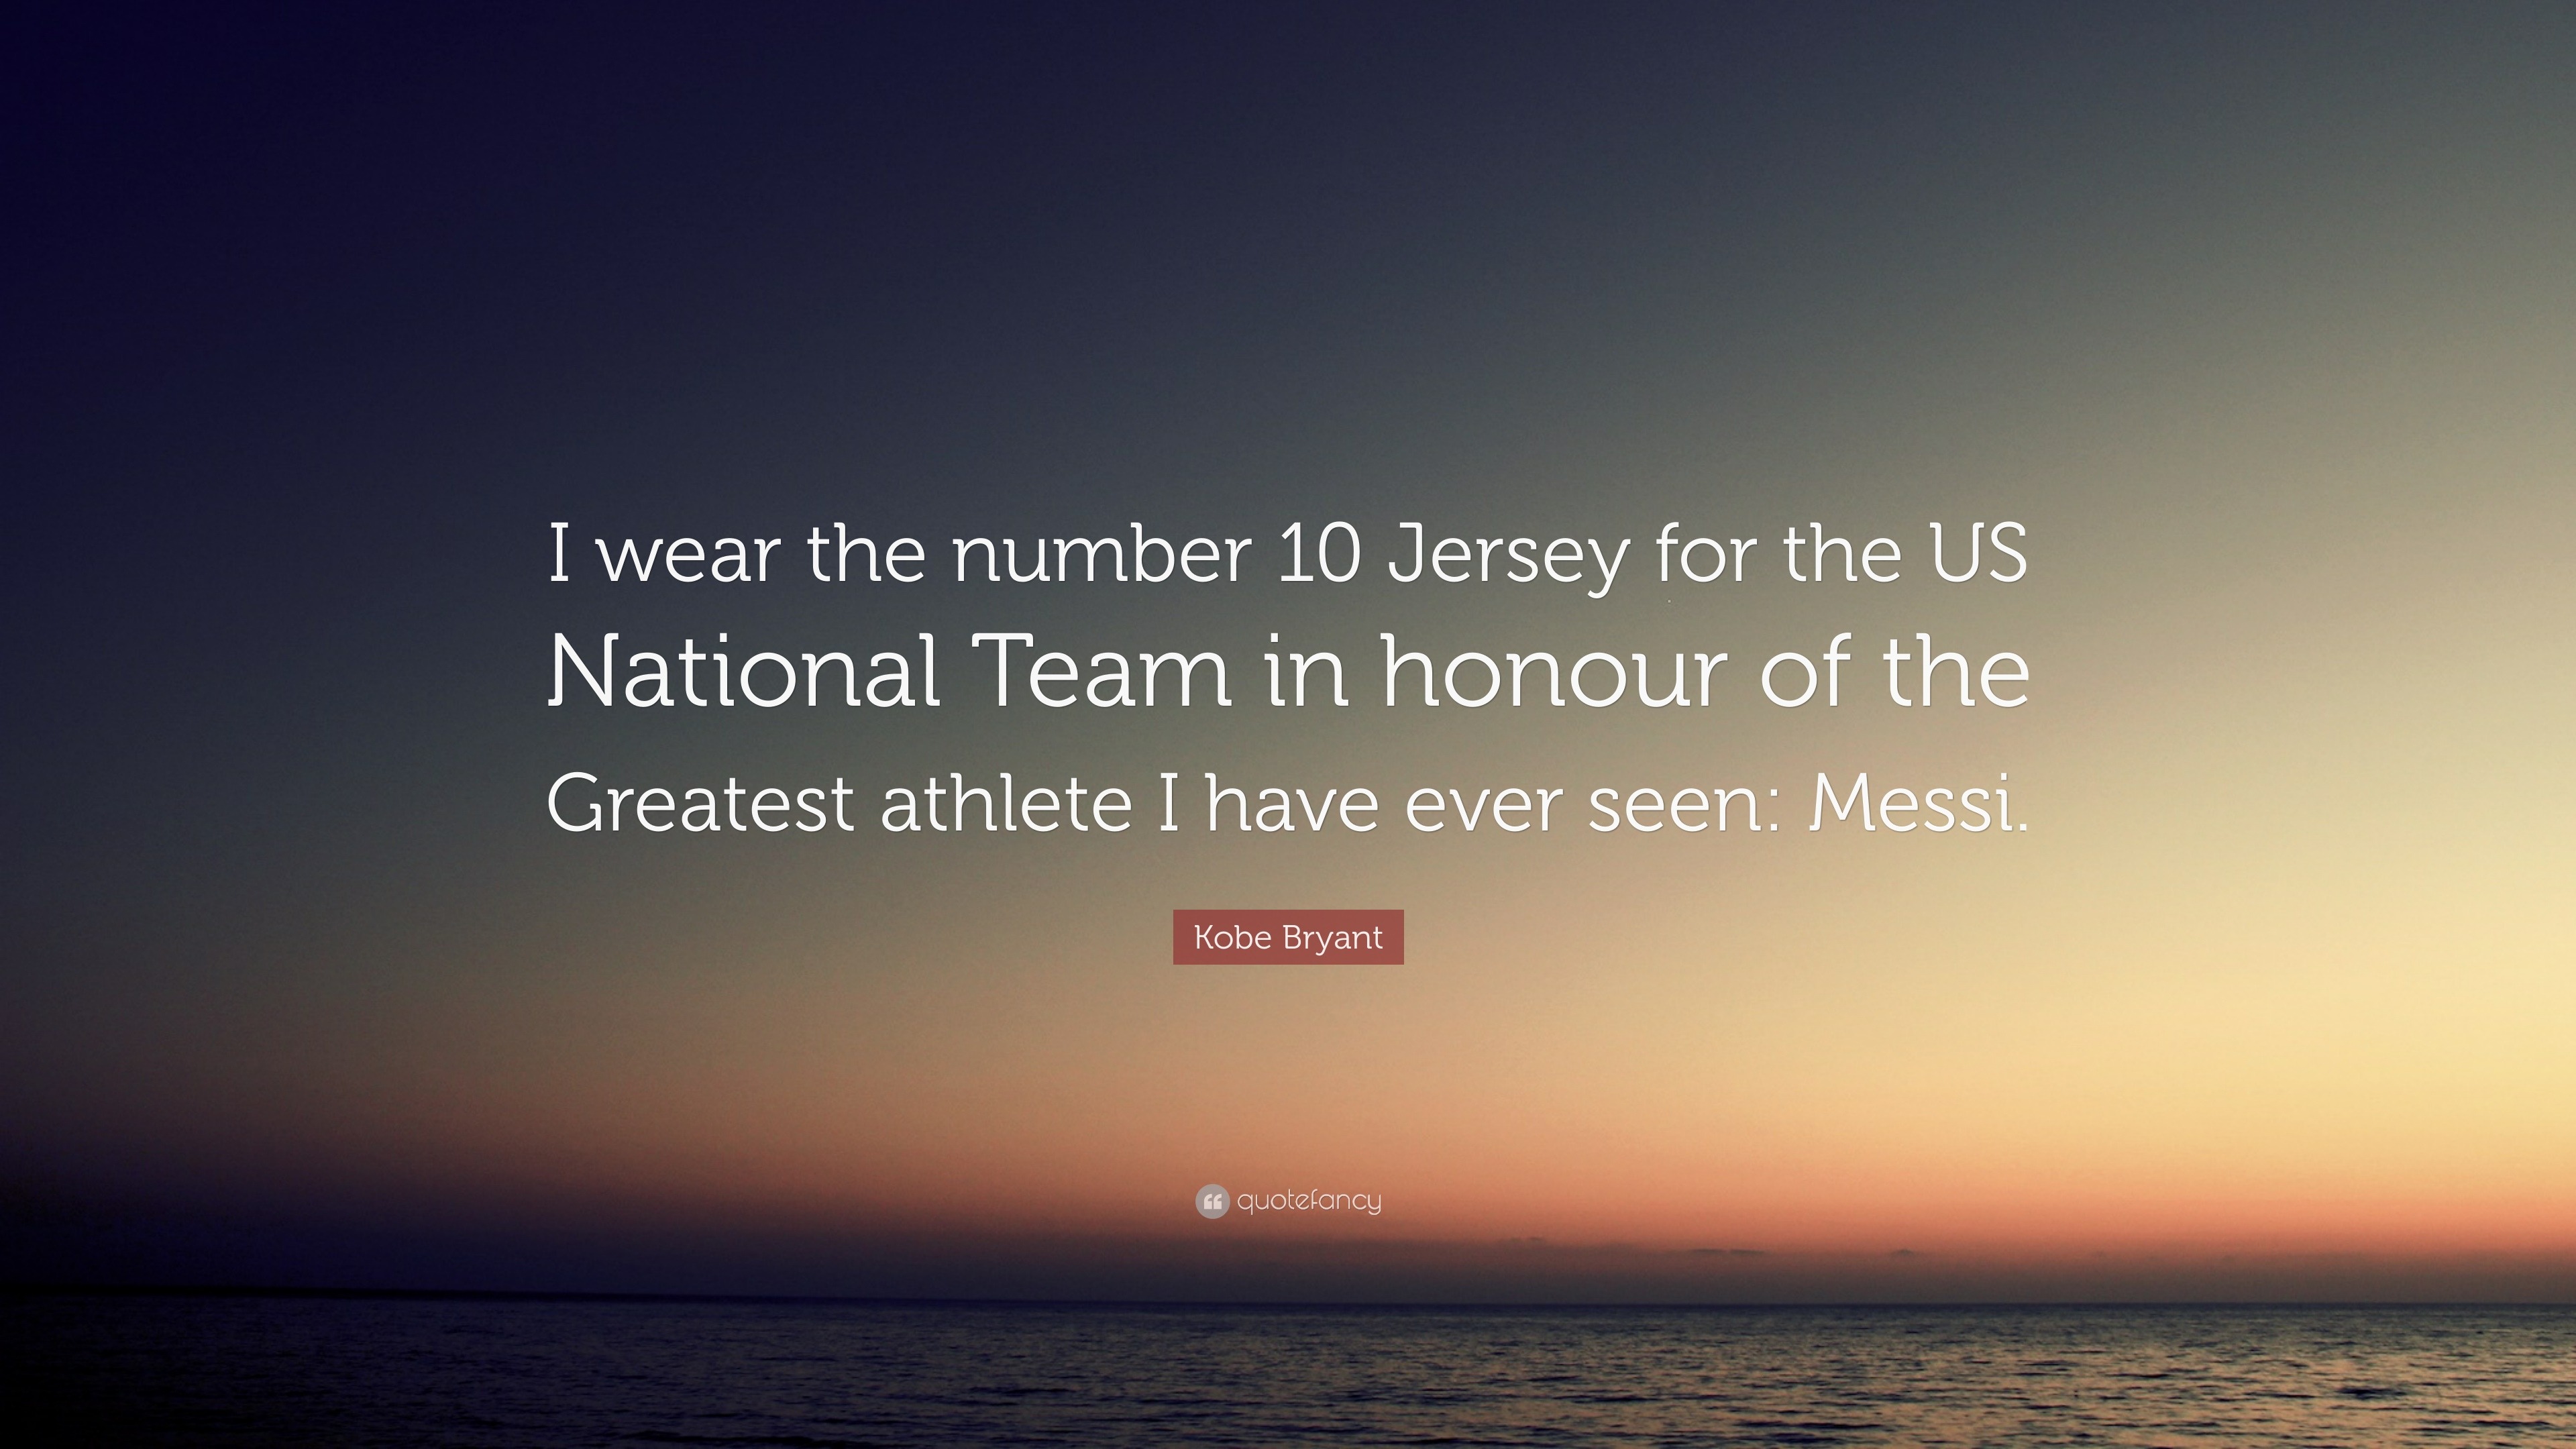 Kobe Bryant Quote: “I wear the number 10 Jersey for the US National Team in  honour